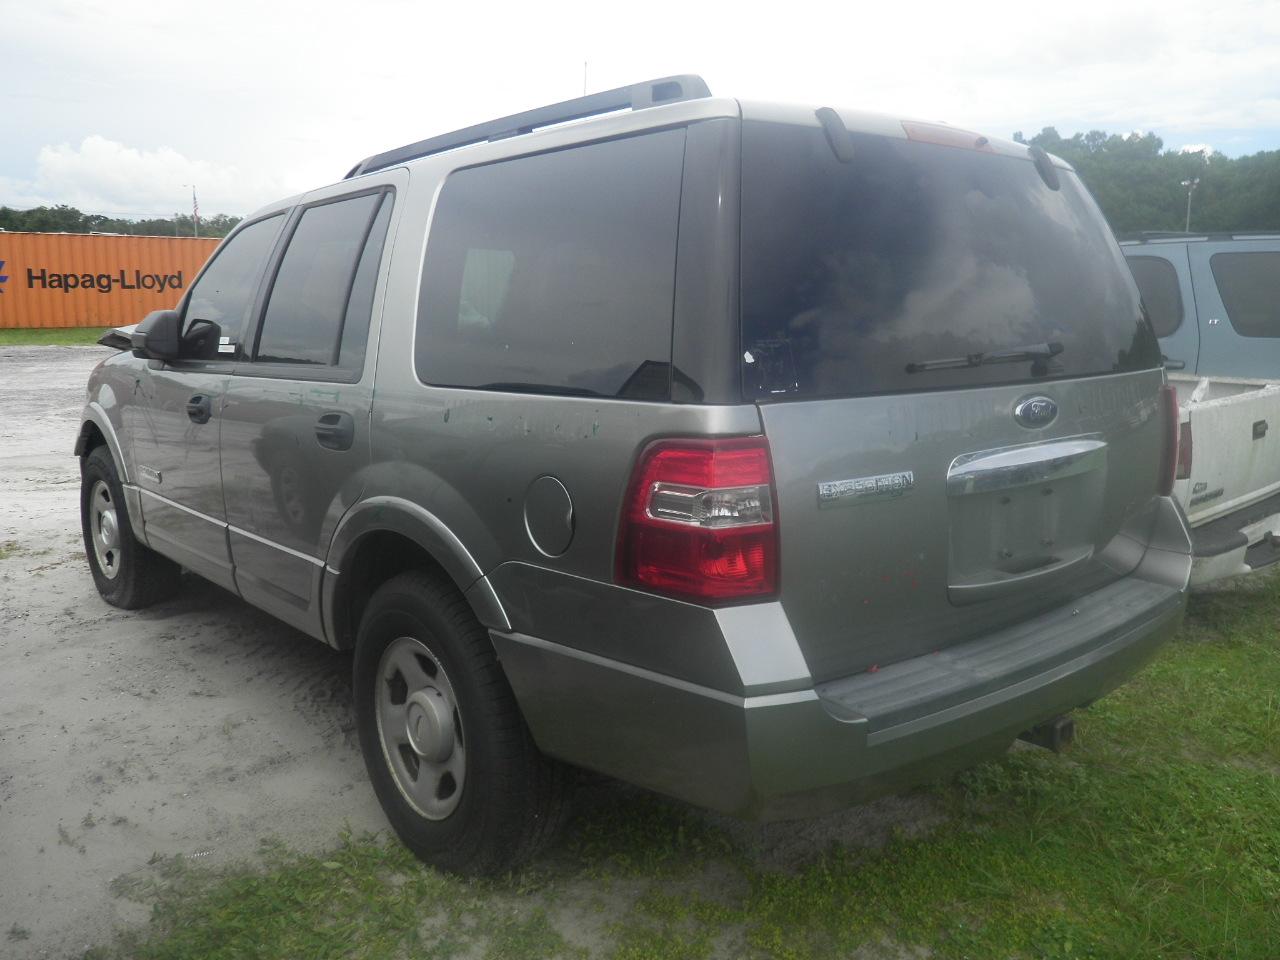 8-05130 (Cars-SUV 4D)  Seller: Florida State F.W.C. 2008 FORD EXPEDITIO